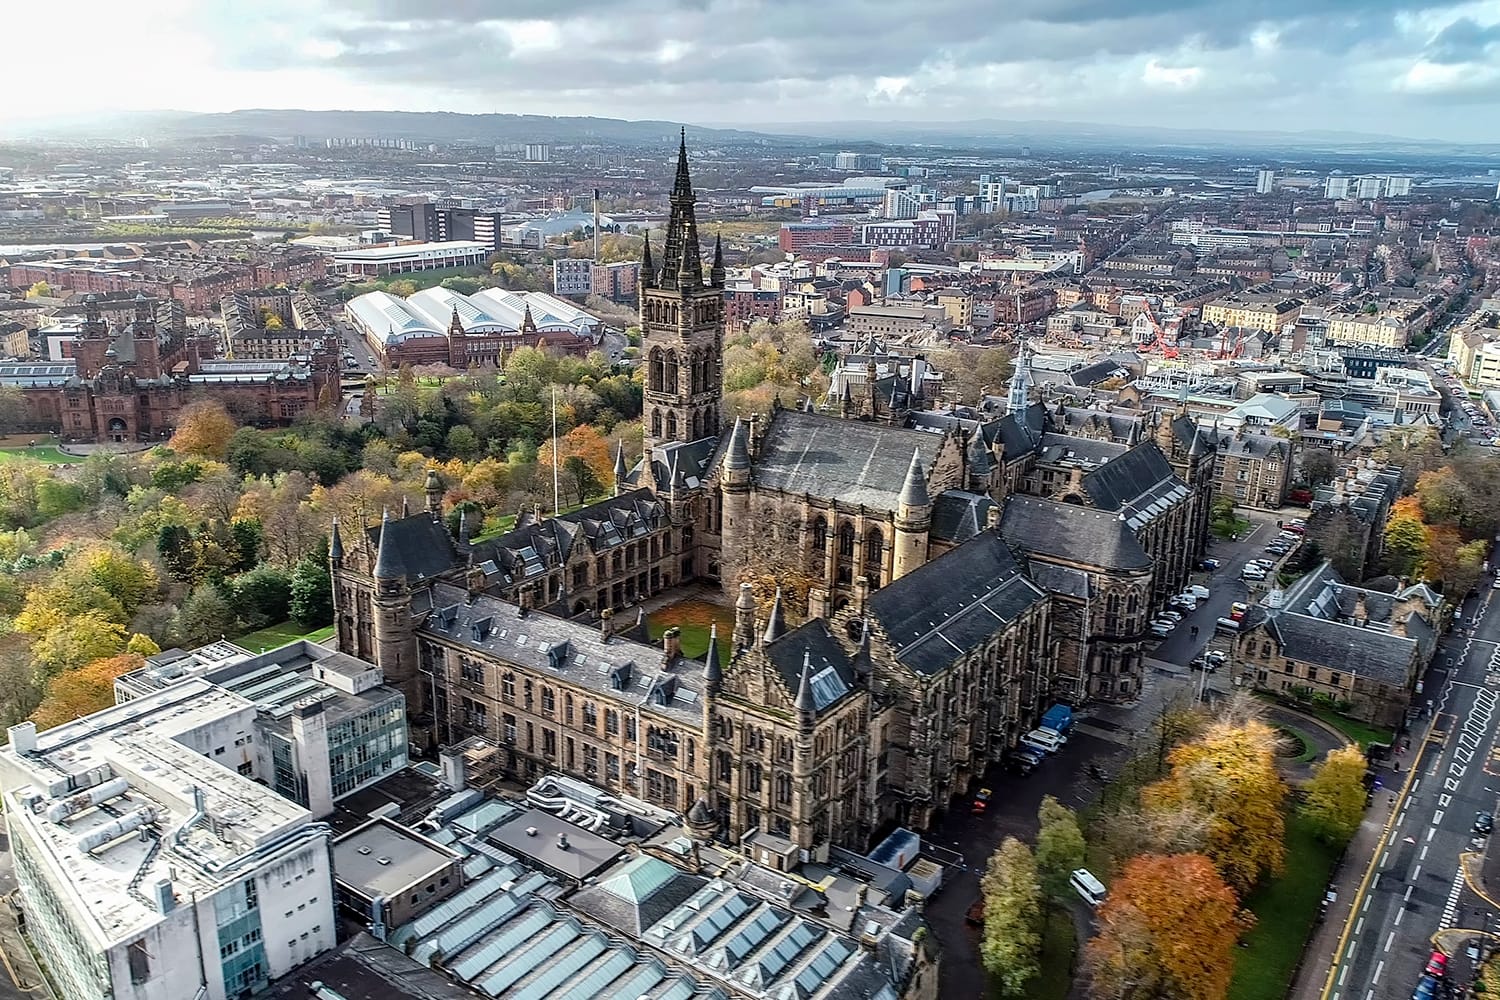 Low level aerial image over the autumn foliage of trees in Kelvingrove Park, Glasgow, to the gothic tower of Glasgow University with the cityscape behind.